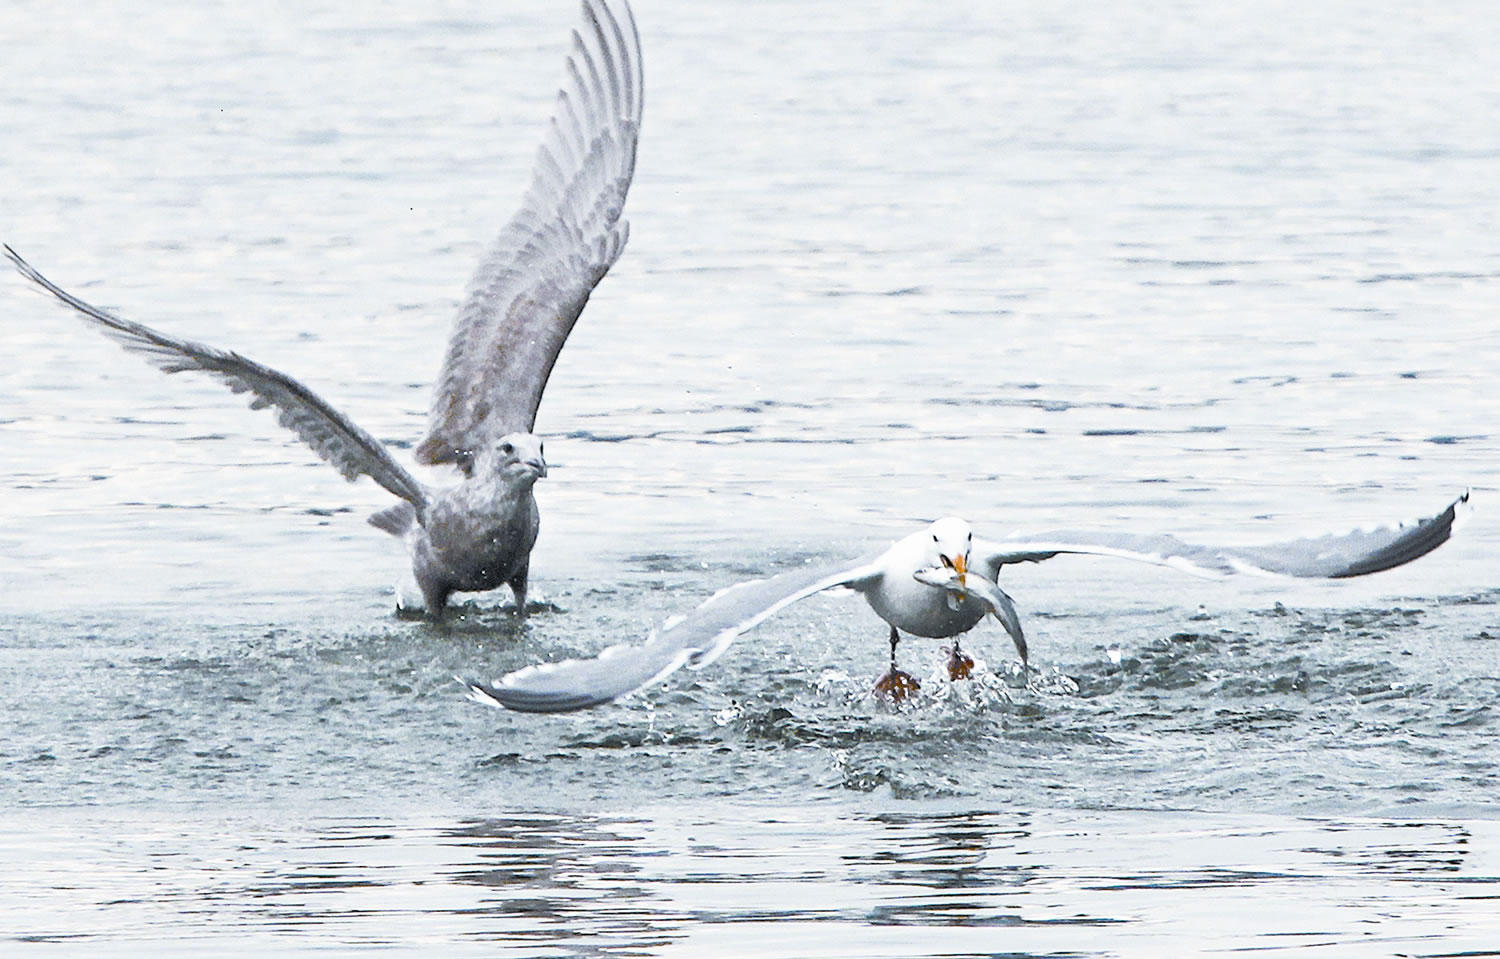 These gulls were looking for a meal in the Columbia River near County Line Park west of Longview.